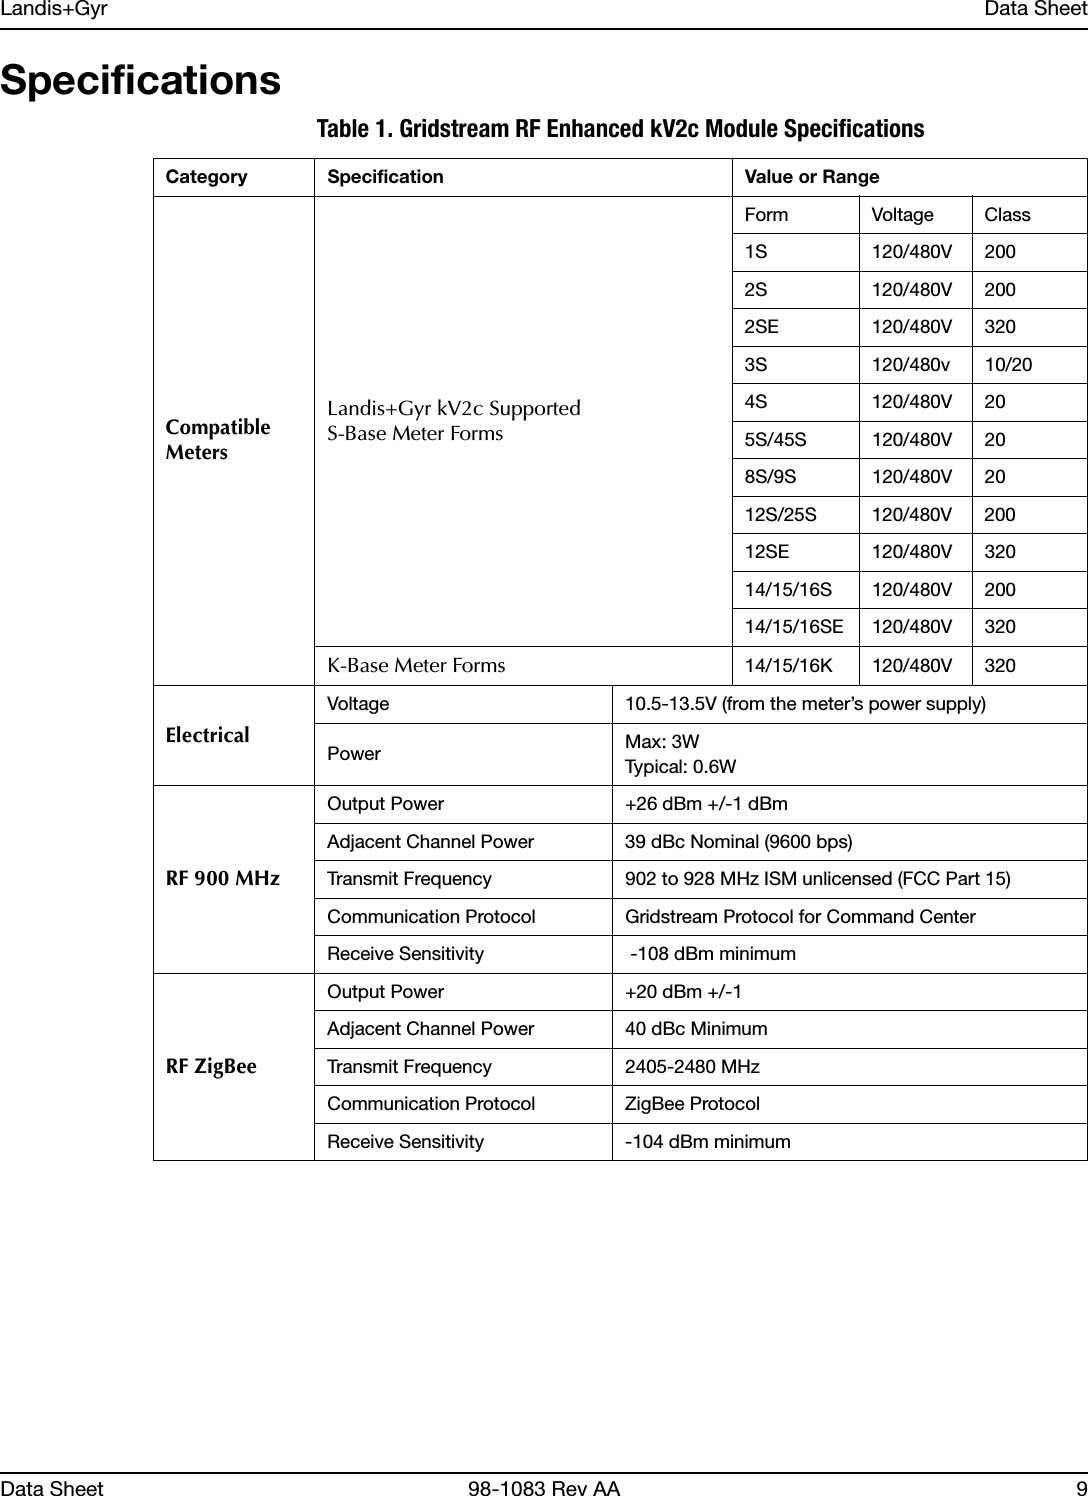 Landis+Gyr Data SheetData Sheet 98-1083 Rev AA 9SpecificationsTable 1. Gridstream RF Enhanced kV2c Module SpecificationsCategory Specification Value or RangeCompatible MetersLandis+Gyr kV2c SupportedS-Base Meter FormsForm Voltage Class1S 120/480V 2002S 120/480V 2002SE 120/480V 3203S 120/480v 10/204S 120/480V 205S/45S 120/480V 208S/9S 120/480V 2012S/25S 120/480V 20012SE 120/480V 32014/15/16S 120/480V 20014/15/16SE 120/480V 320K-Base Meter Forms 14/15/16K 120/480V 320ElectricalVoltage 10.5-13.5V (from the meter’s power supply)Power Max: 3WTypical: 0.6WRF 900 MHzOutput Power +26 dBm +/-1 dBmAdjacent Channel Power 39 dBc Nominal (9600 bps)Transmit Frequency 902 to 928 MHz ISM unlicensed (FCC Part 15)Communication Protocol Gridstream Protocol for Command CenterReceive Sensitivity  -108 dBm minimumRF ZigBeeOutput Power +20 dBm +/-1Adjacent Channel Power 40 dBc MinimumTransmit Frequency 2405-2480 MHzCommunication Protocol ZigBee ProtocolReceive Sensitivity -104 dBm minimum